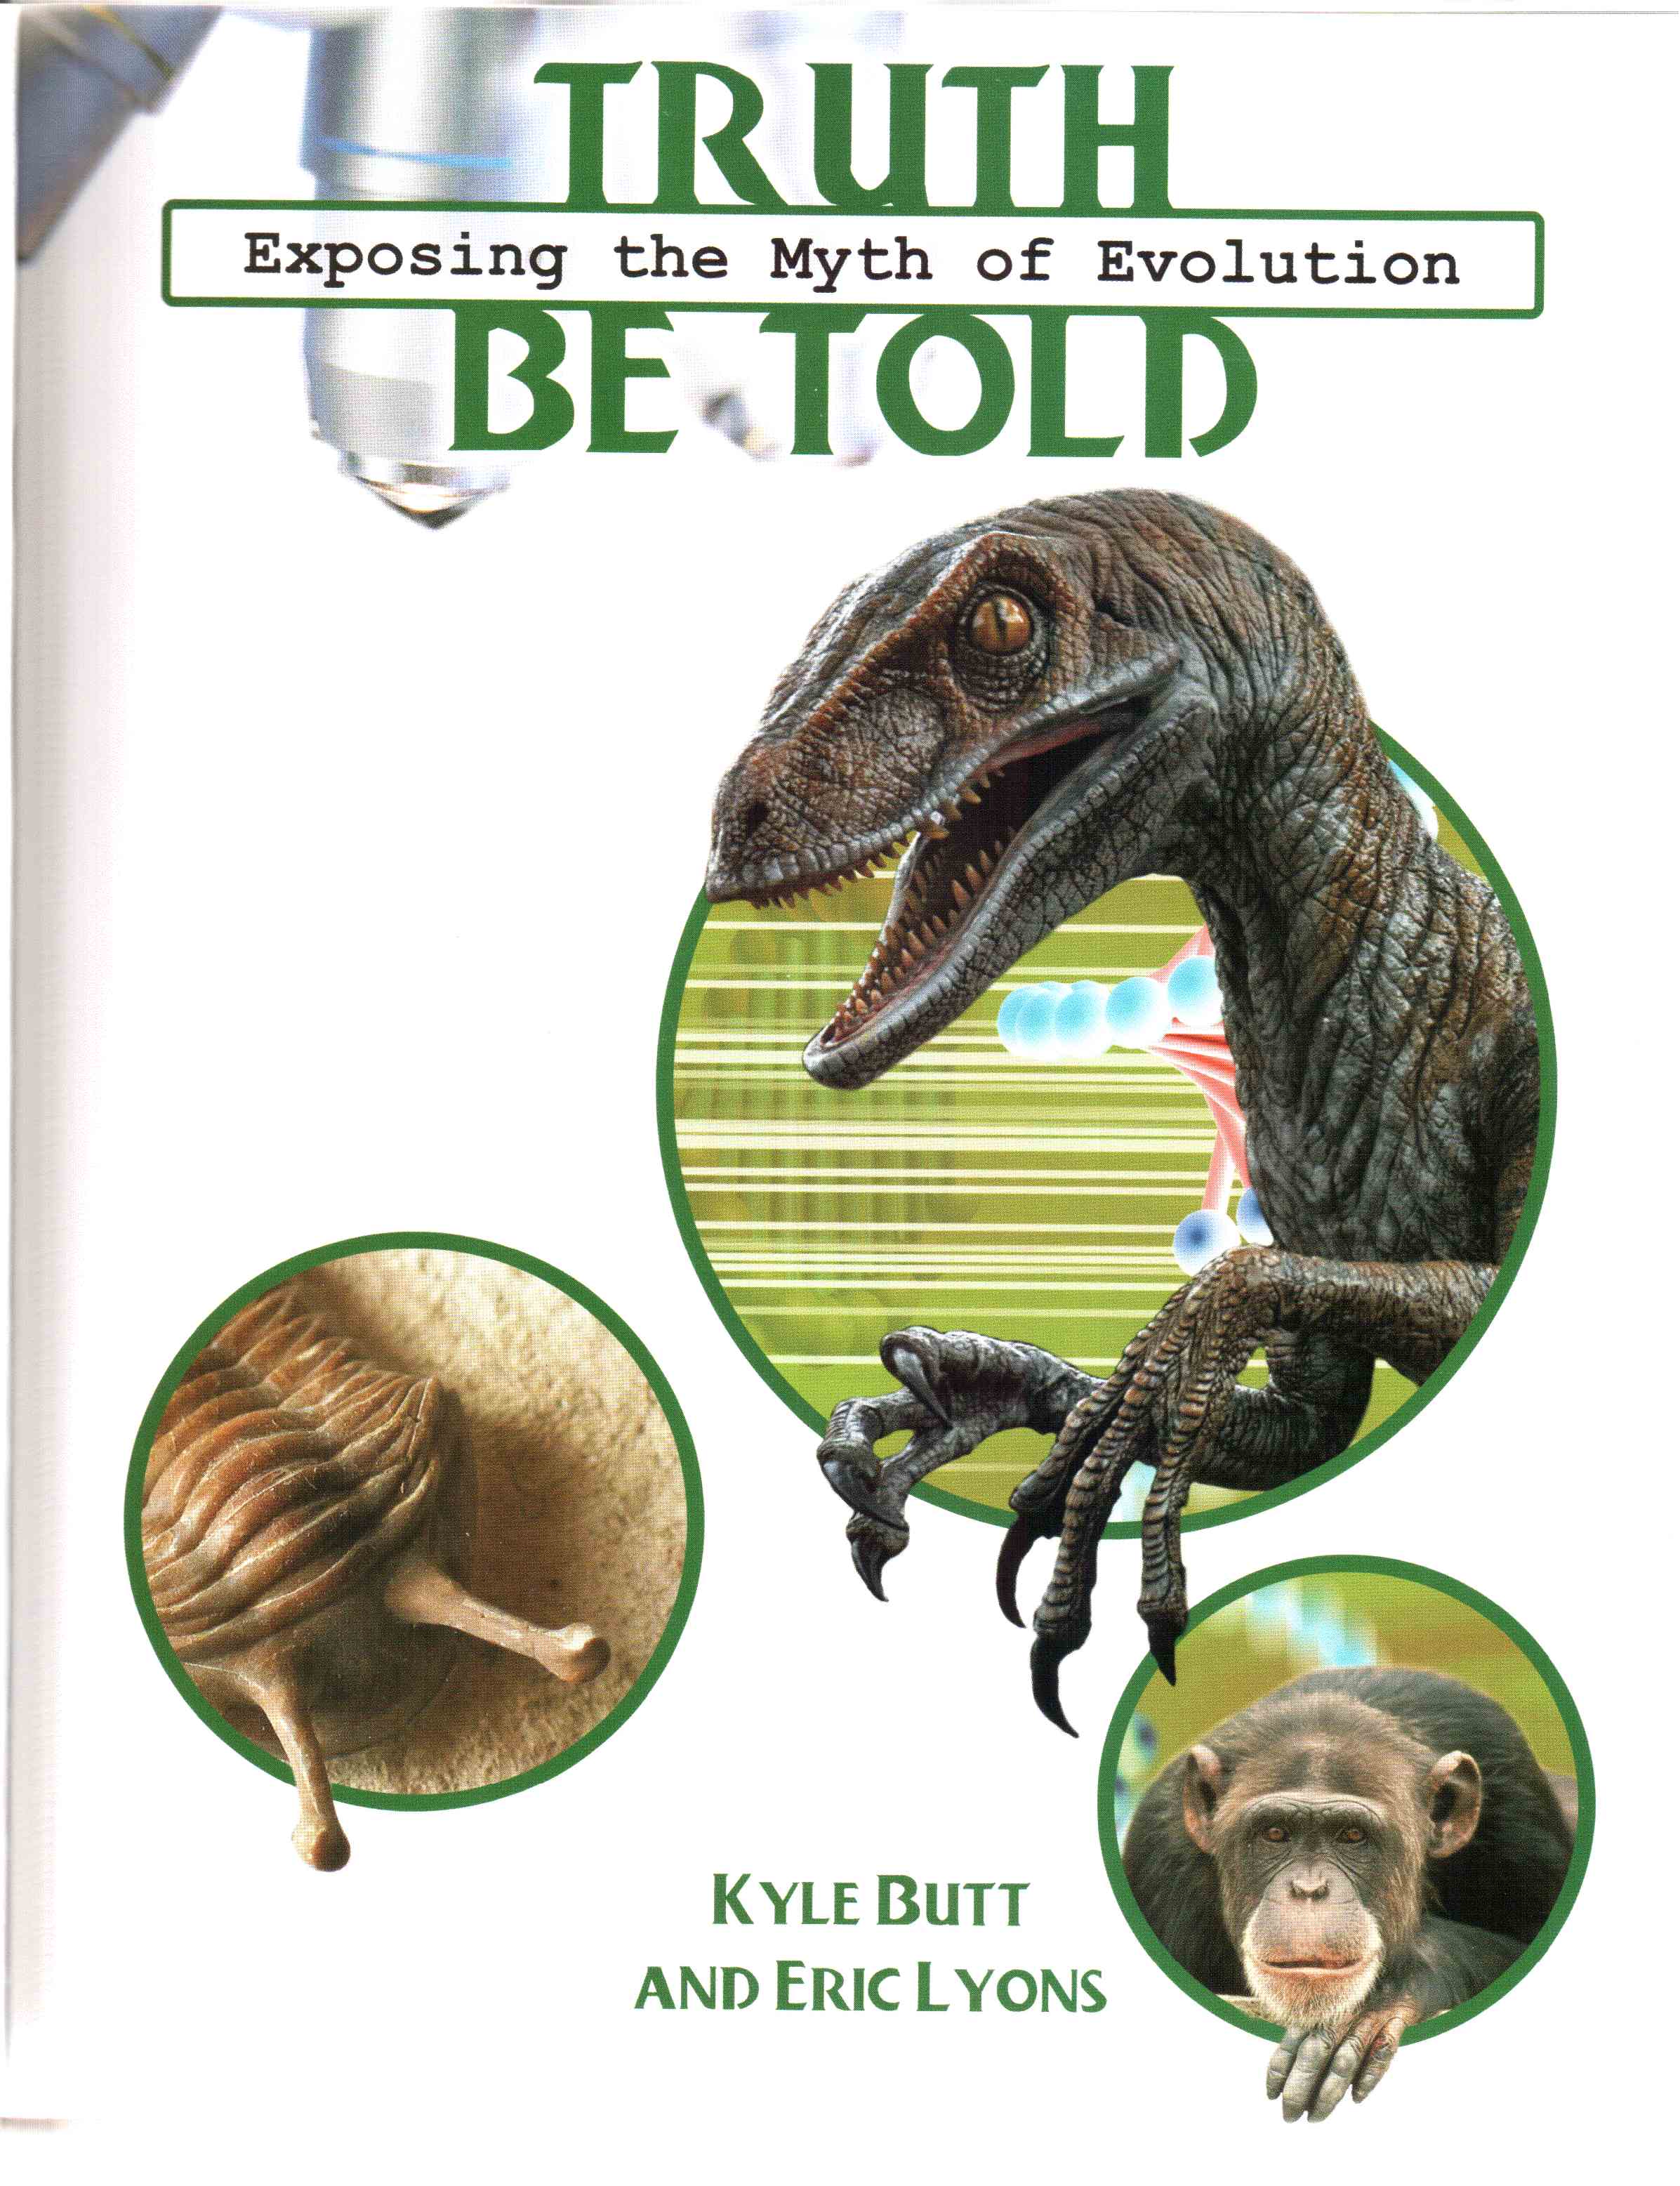 The creationist textbook distributed to children in East Kilbride